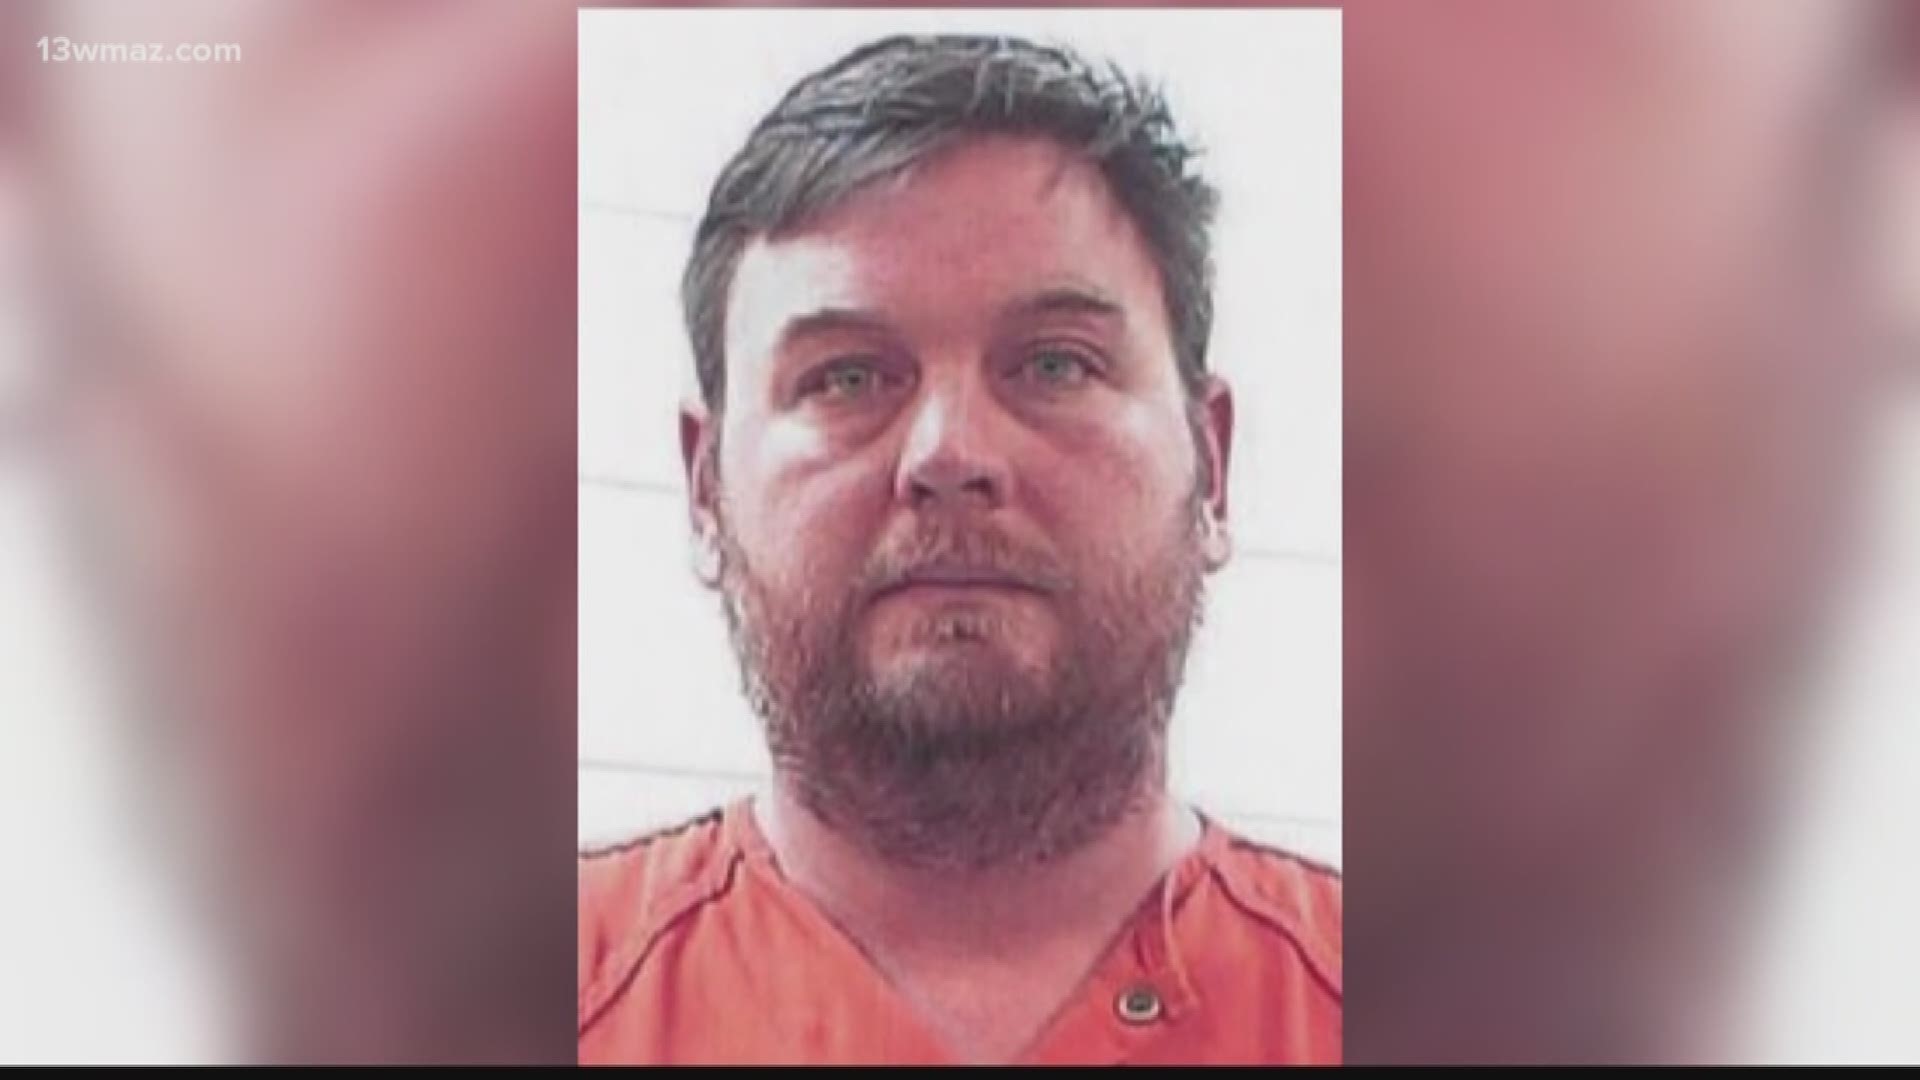 Bo Dukes is charged with concealing the death of another, hindering apprehension or punishment of a criminal, and making a false statement to GBI agents about his involvement with the case during a June 2016 interview in Wilcox County.